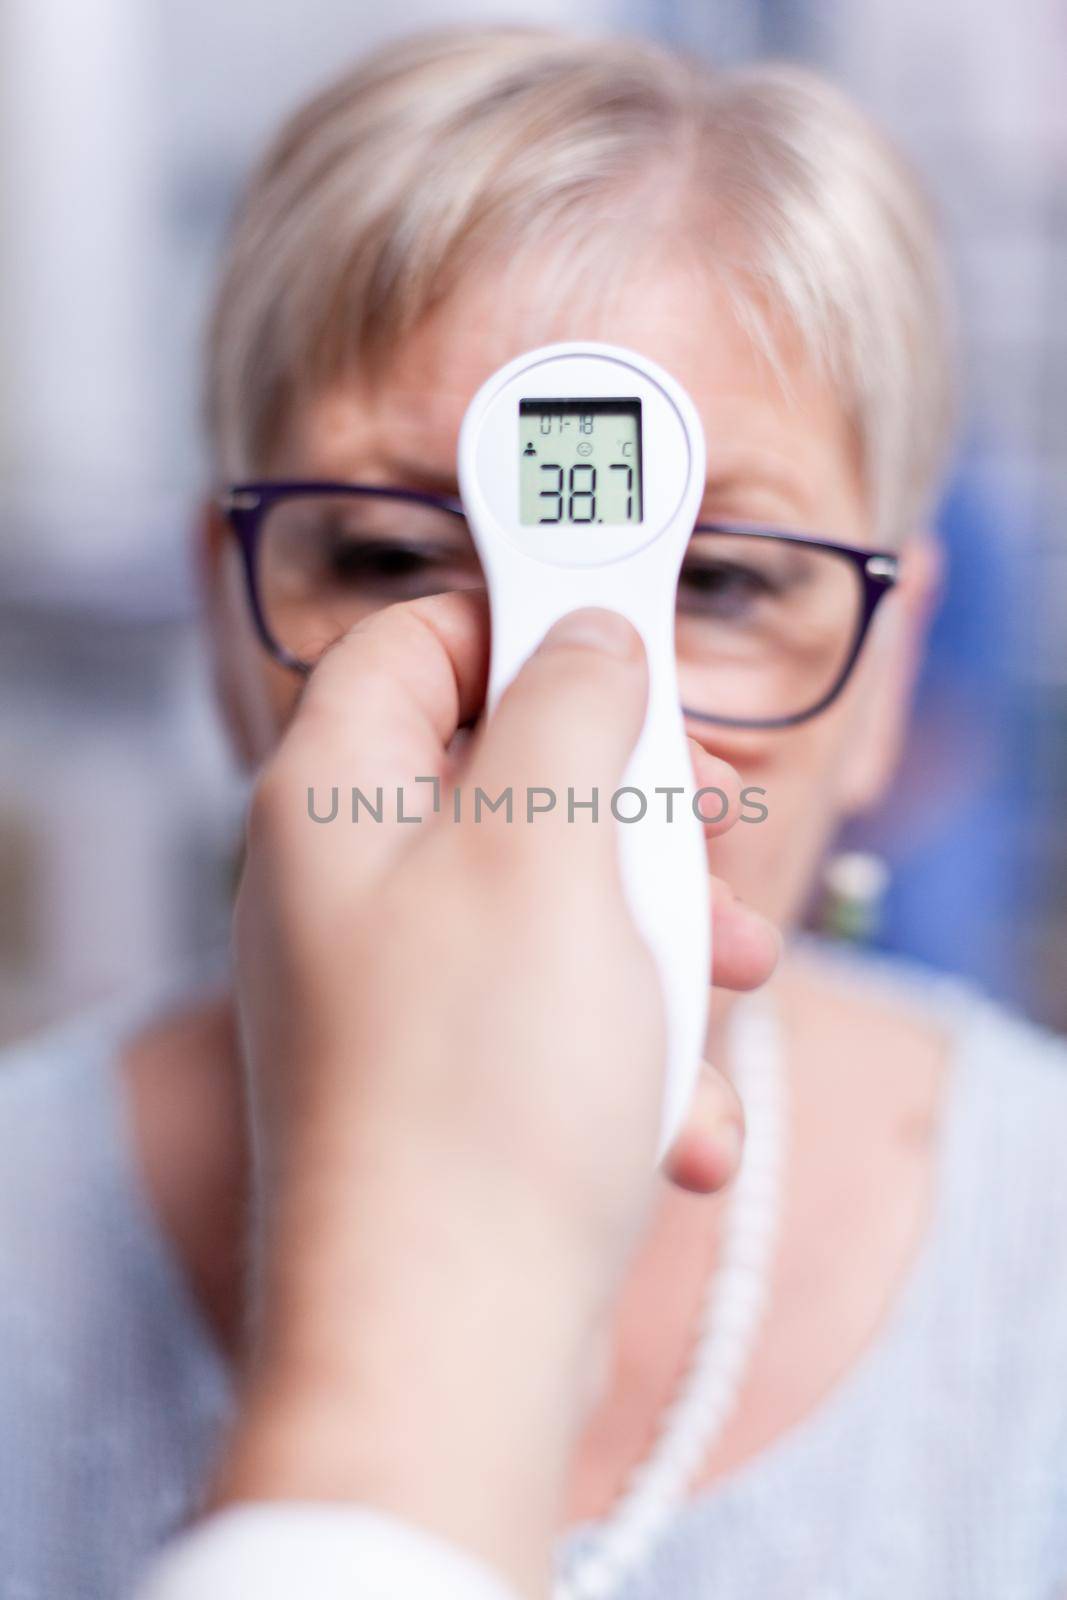 Thermometer showing body temperature of sick mature patient woman in hospital during medical examination. Consultation for infections and disease during global pandemic,flu, tool, sickness.